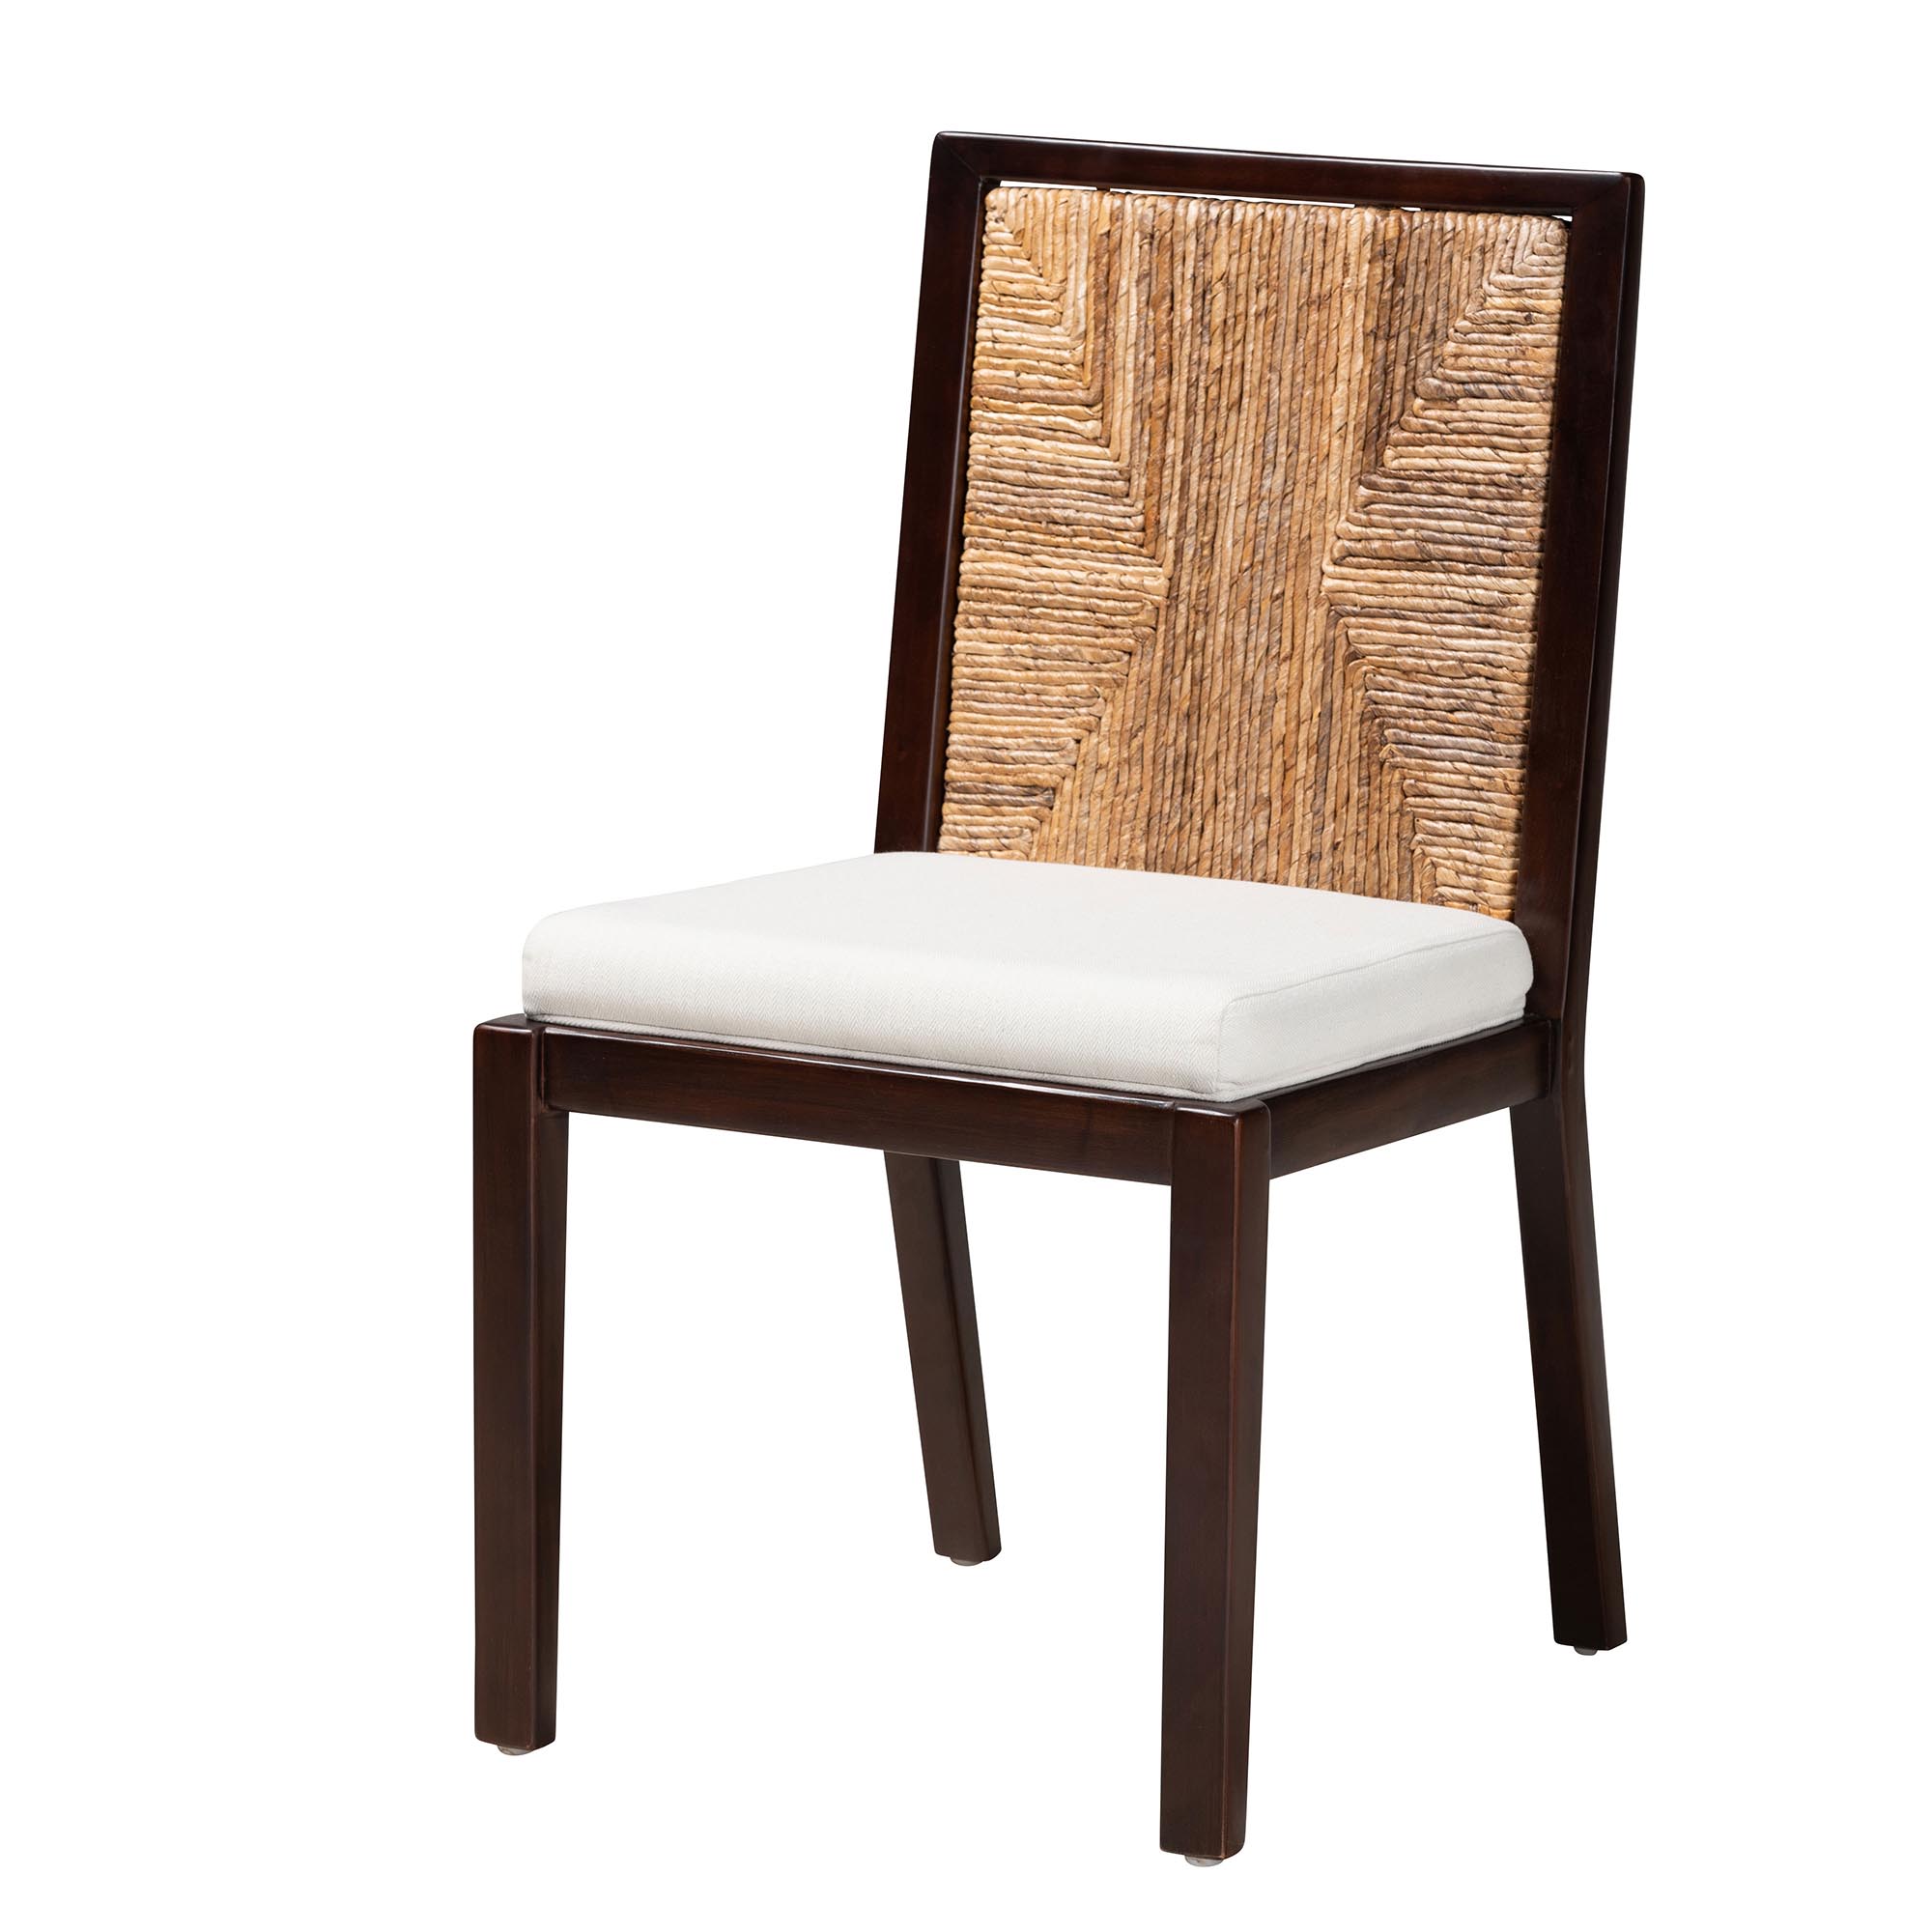 Baxton Studio Joana Modern Bohemian Dark Brown Mahogany Wood and Natural Abaca Dining Side Chair Affordable modern furniture in Chicago, classic dining room furniture, modern dining chairs, cheap dining chairs